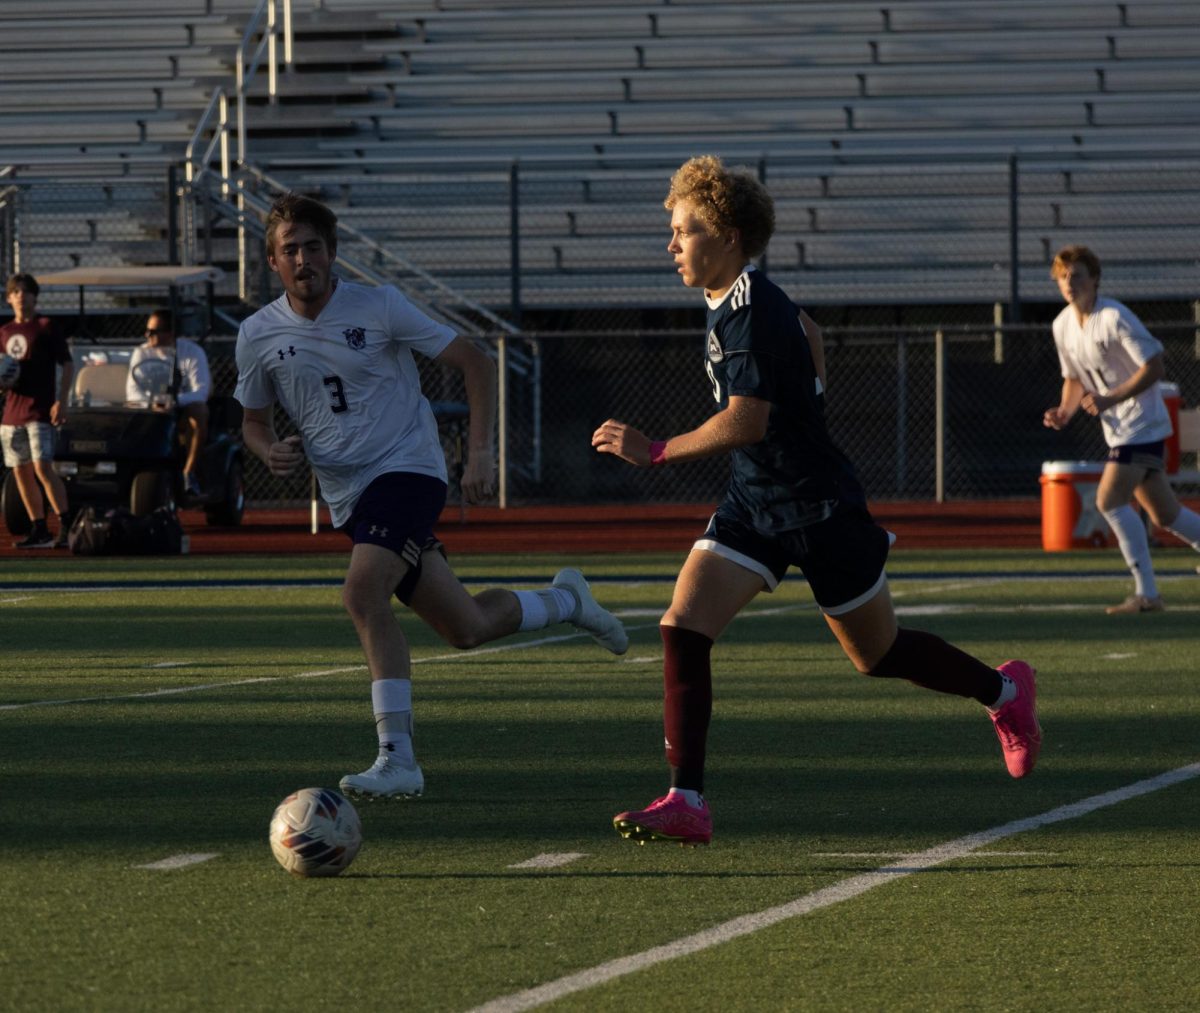 During varsity soccer’s game against Troy High School, Carter Radeke runs down the field with the ball. Radeke then quickly passes the ball to a teammate where they later scored a goal and won the game 2-0.